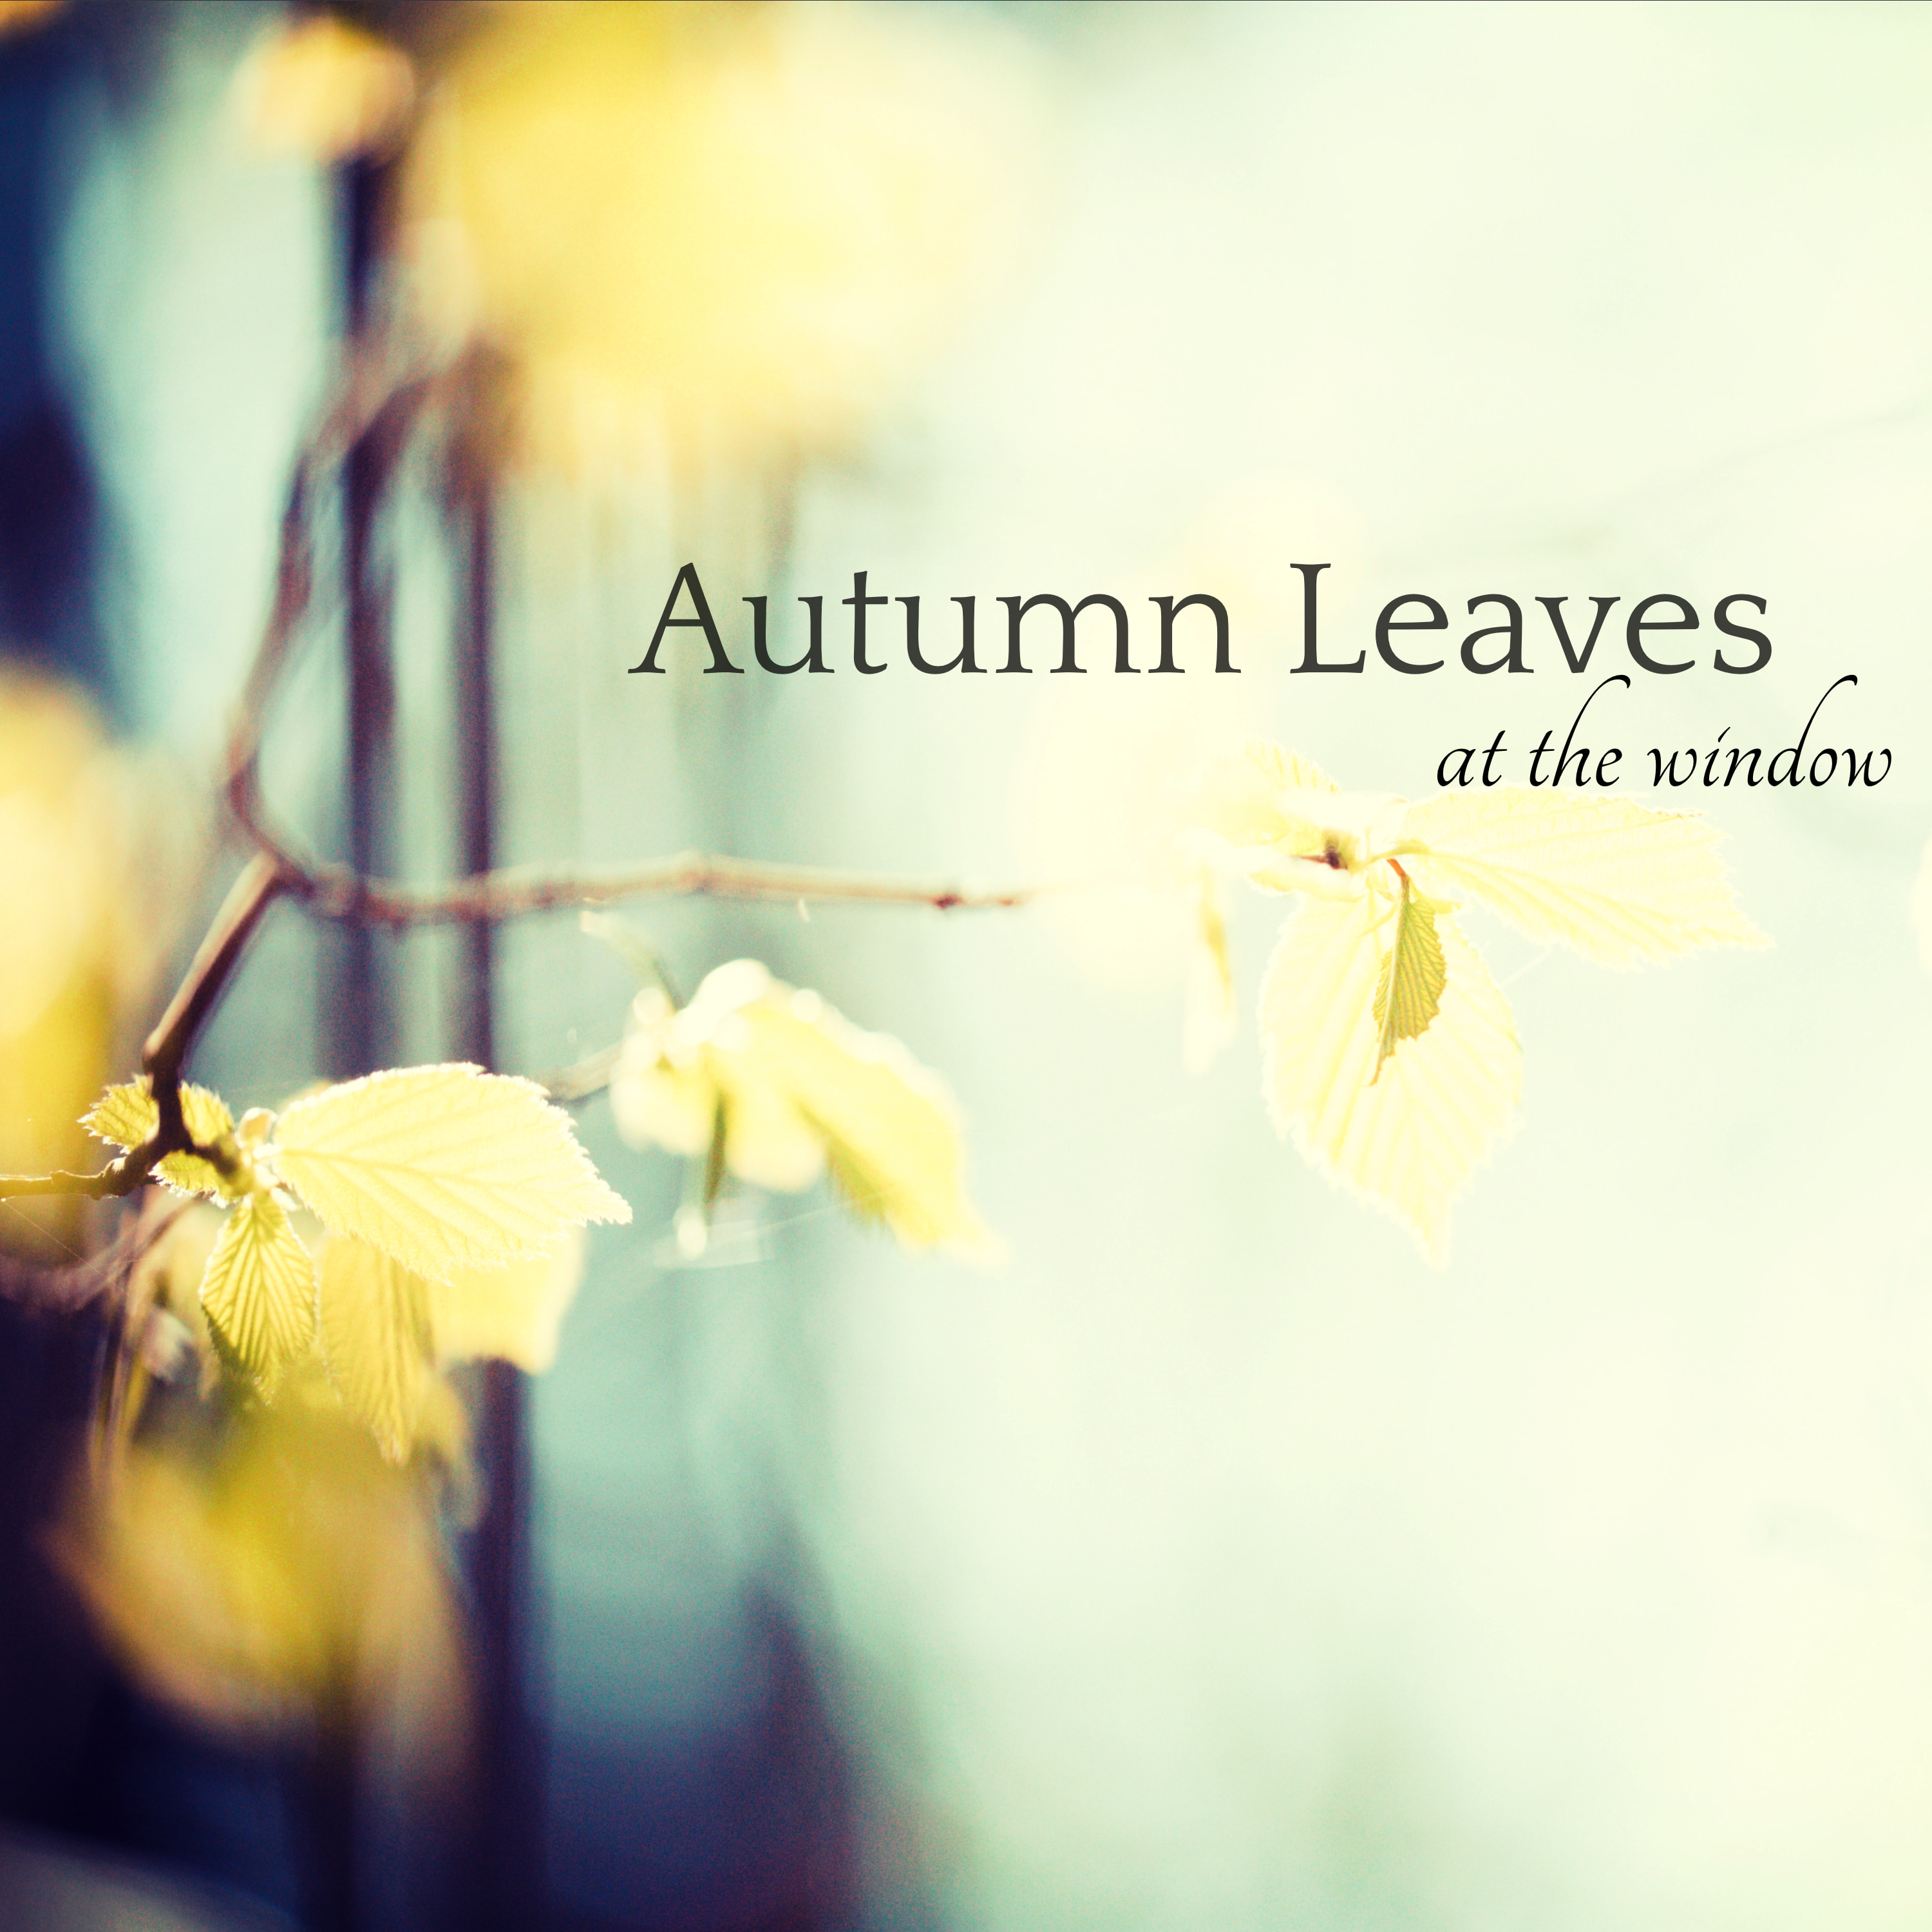 Autumn Leaves at the Window – Jazz & Piano Notes, Fall Leaves Romantic Autumn Mood Music